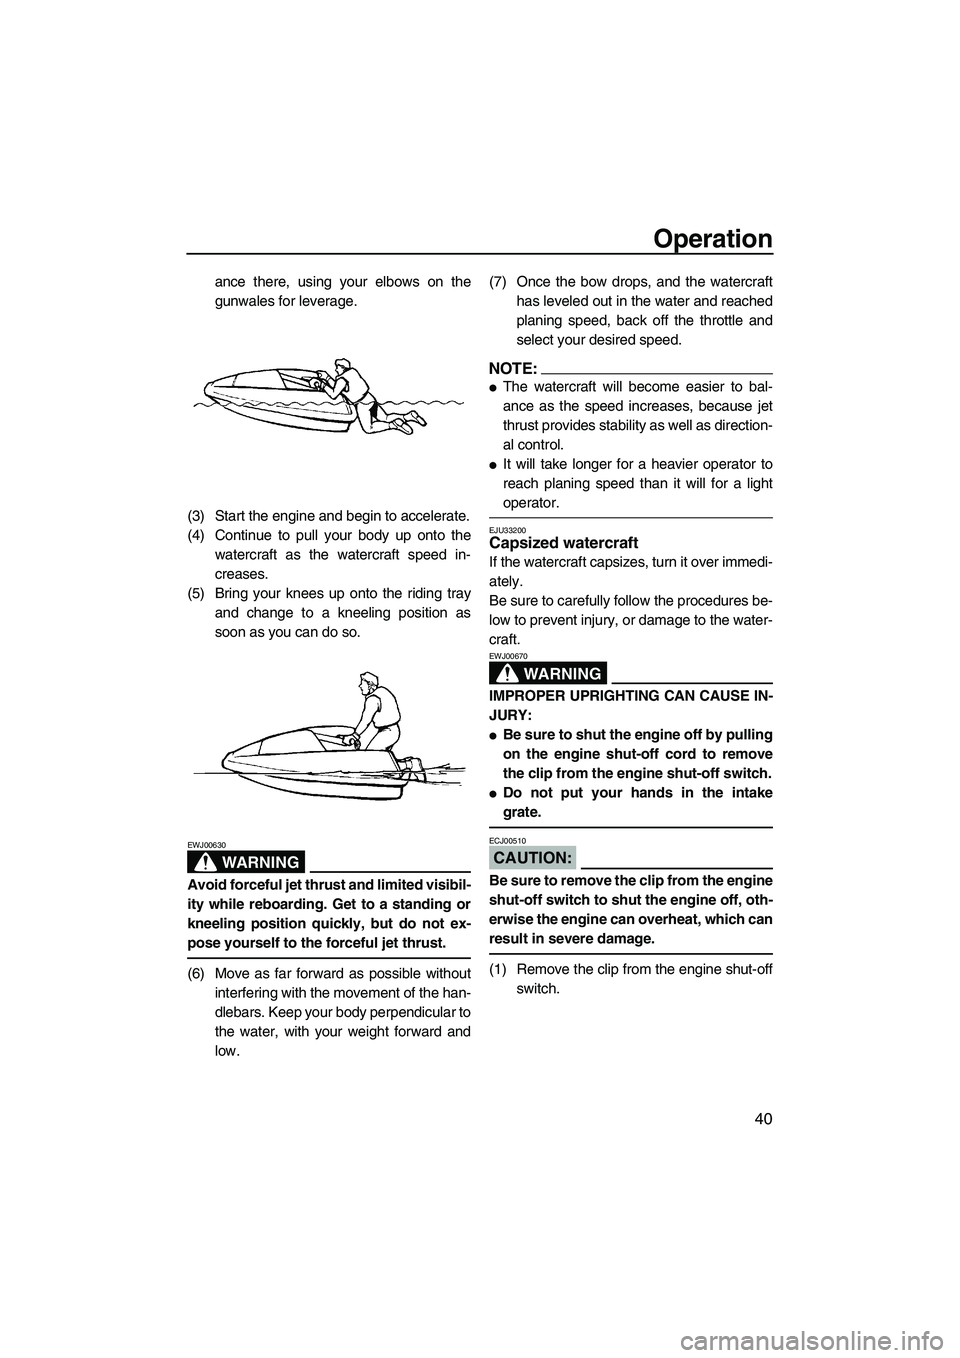 YAMAHA SUPERJET 2007 Service Manual Operation
40
ance there, using your elbows on the
gunwales for leverage.
(3) Start the engine and begin to accelerate.
(4) Continue to pull your body up onto the
watercraft as the watercraft speed in-